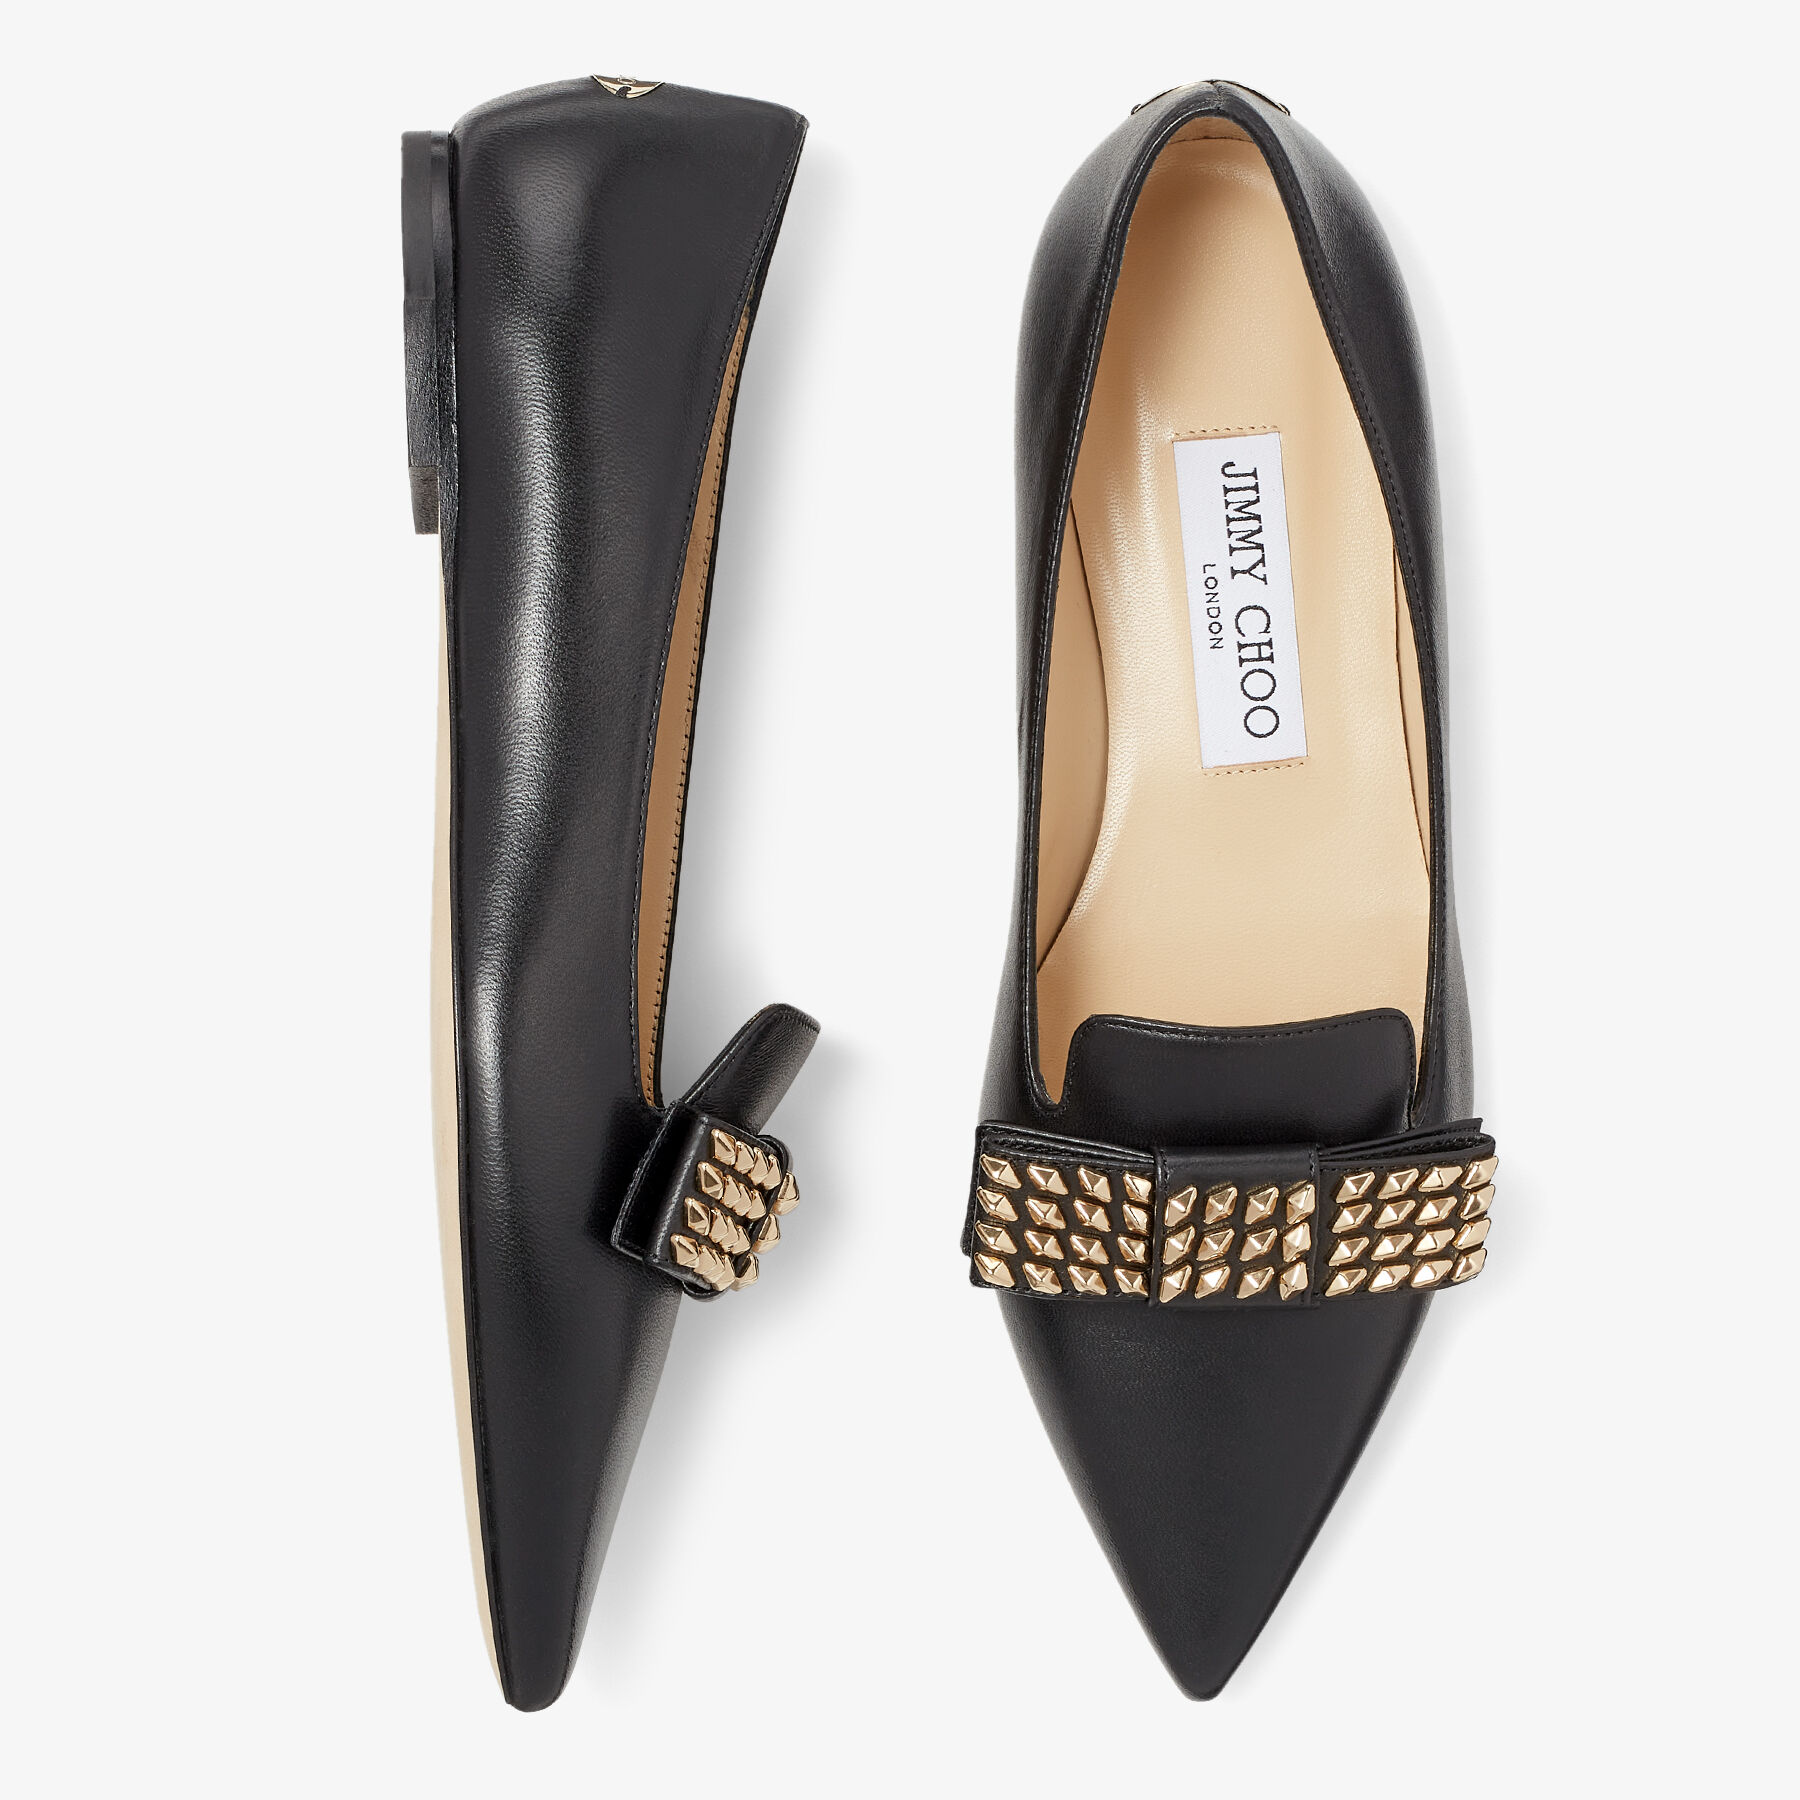 GALA | Black Nappa Leather Flats with Studs | Autumn Collection